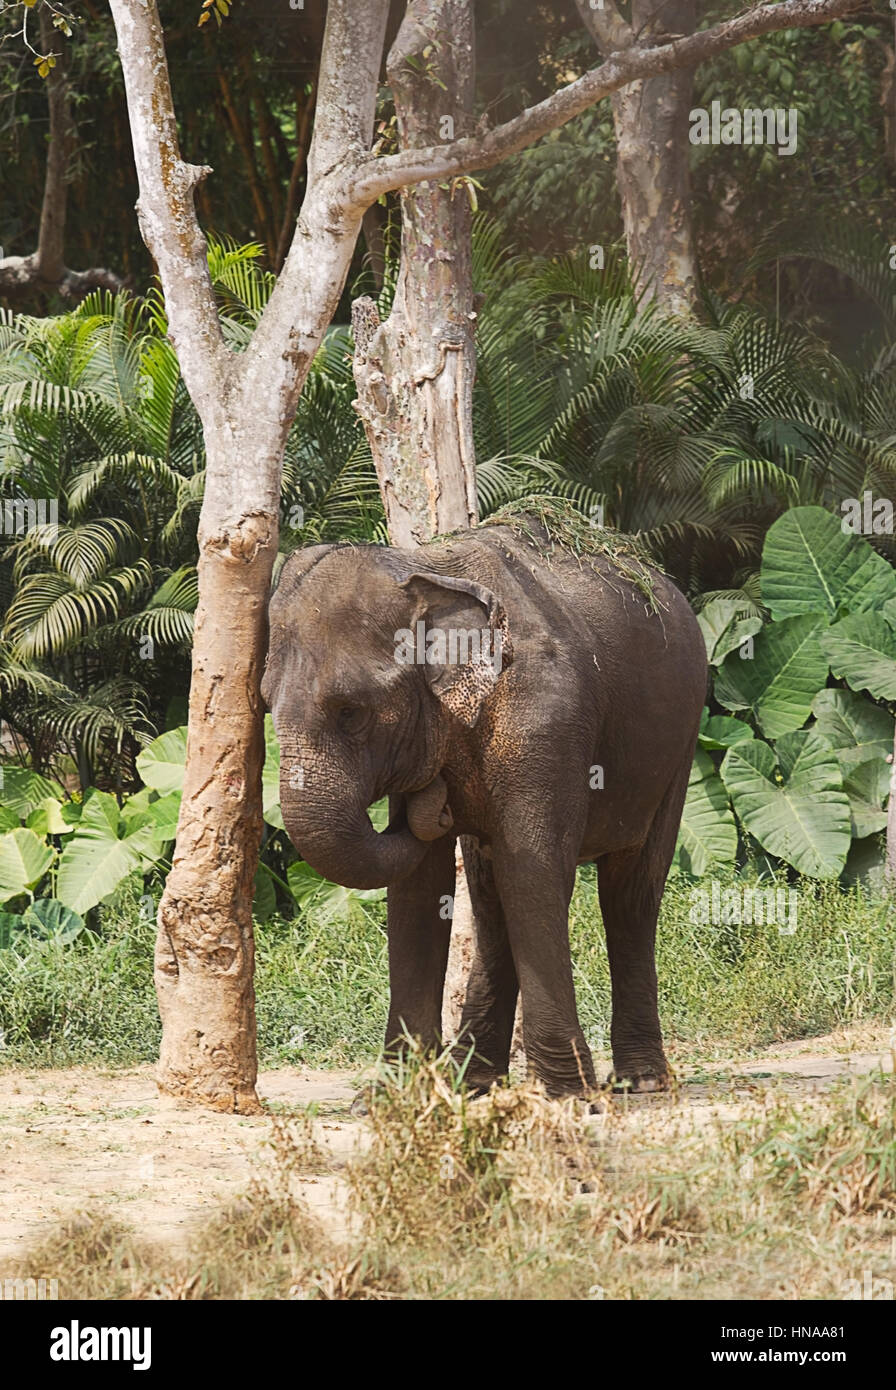 A young Asian elephant rubbing against a tree Stock Photo